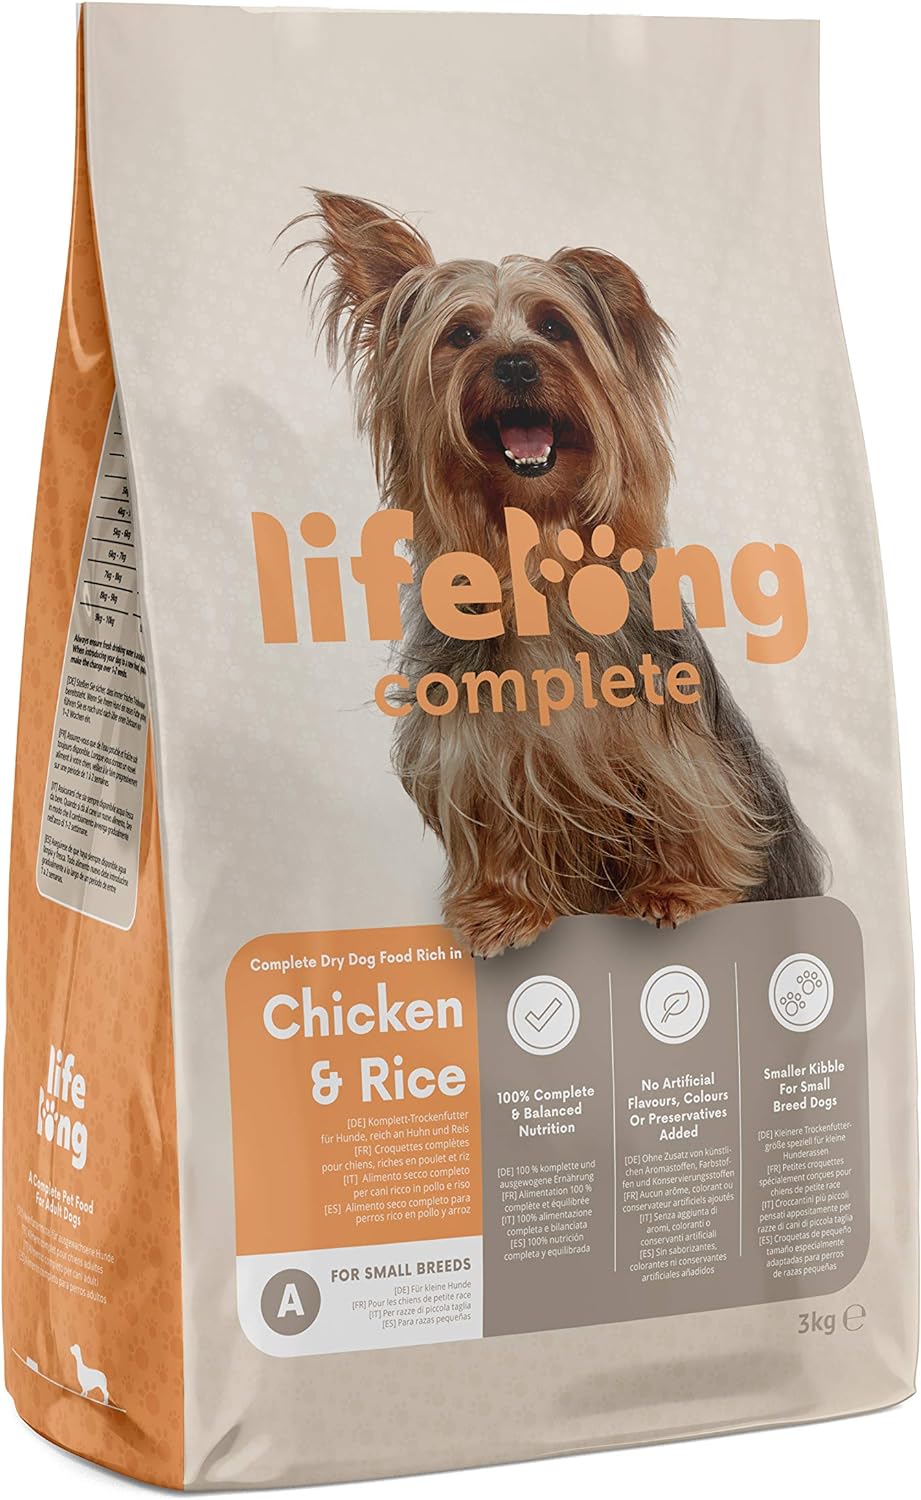 Amazon Brand - Lifelong - Complete Dry Dog Food Rich in Chicken and Rice for Small Breeds, 1 Pack of 3kg?5400606003507